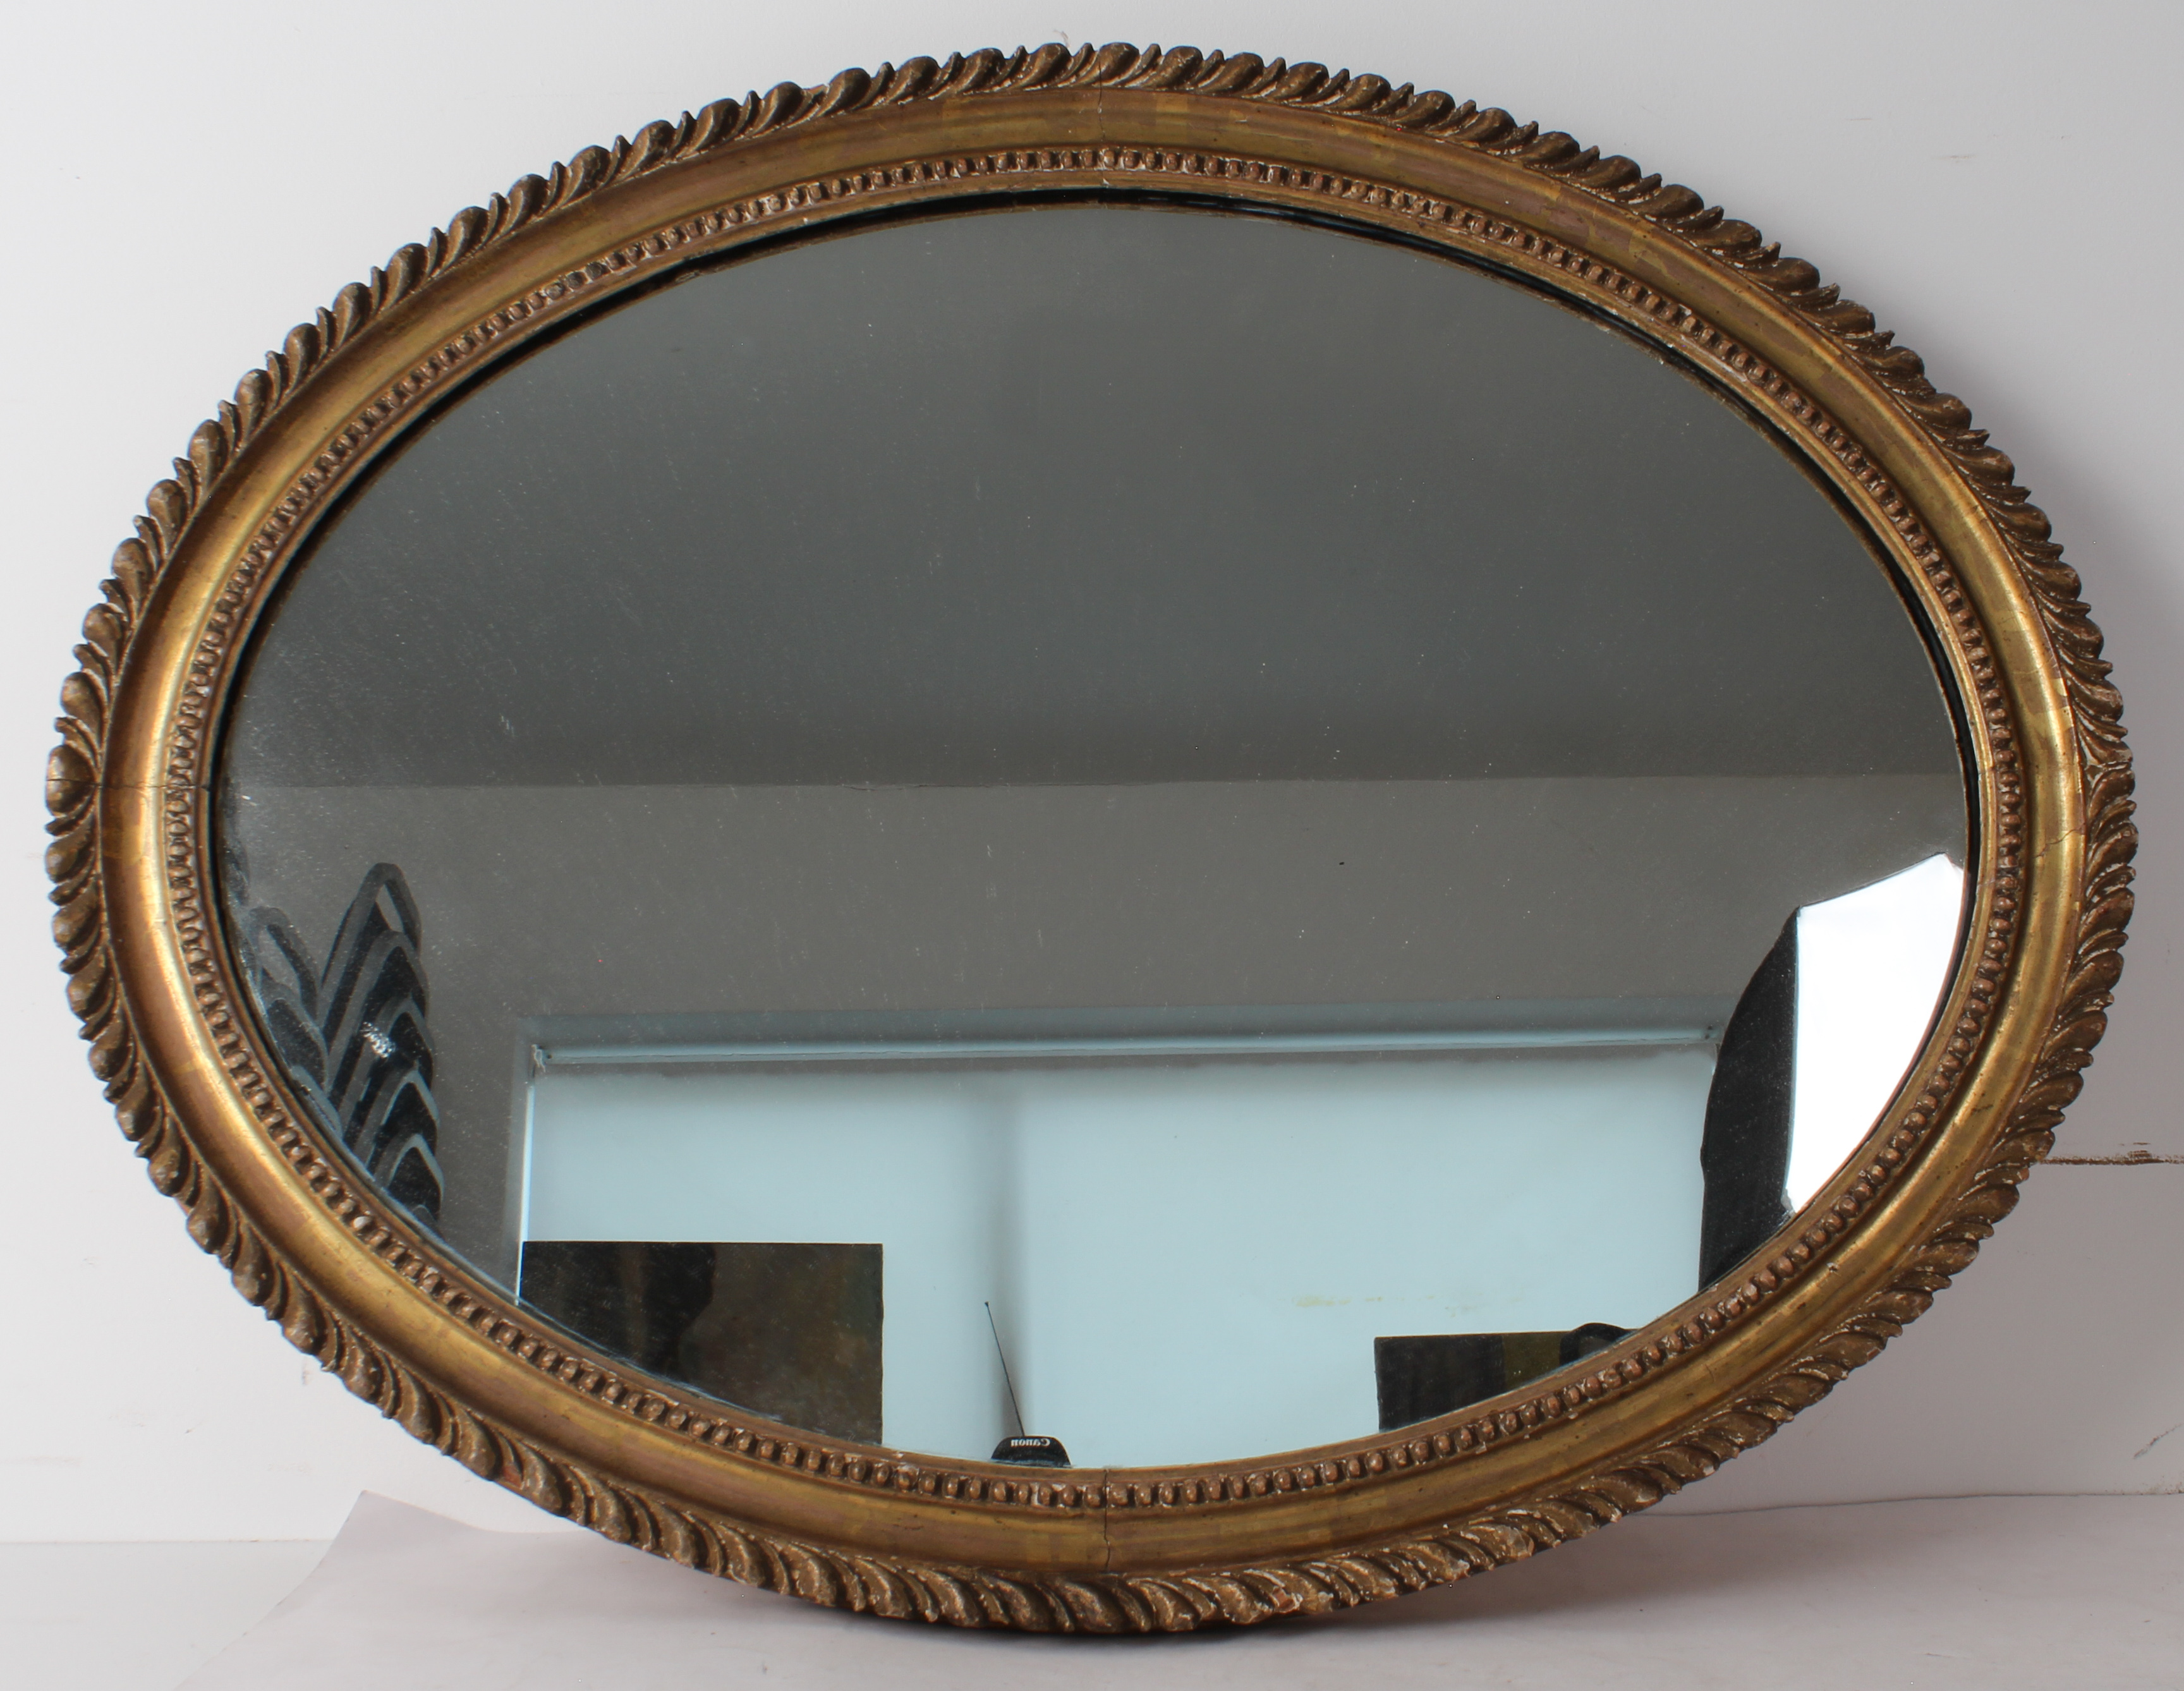 An oval gilt and composition mirror - the late 19th century frame with gadrooned border and shot